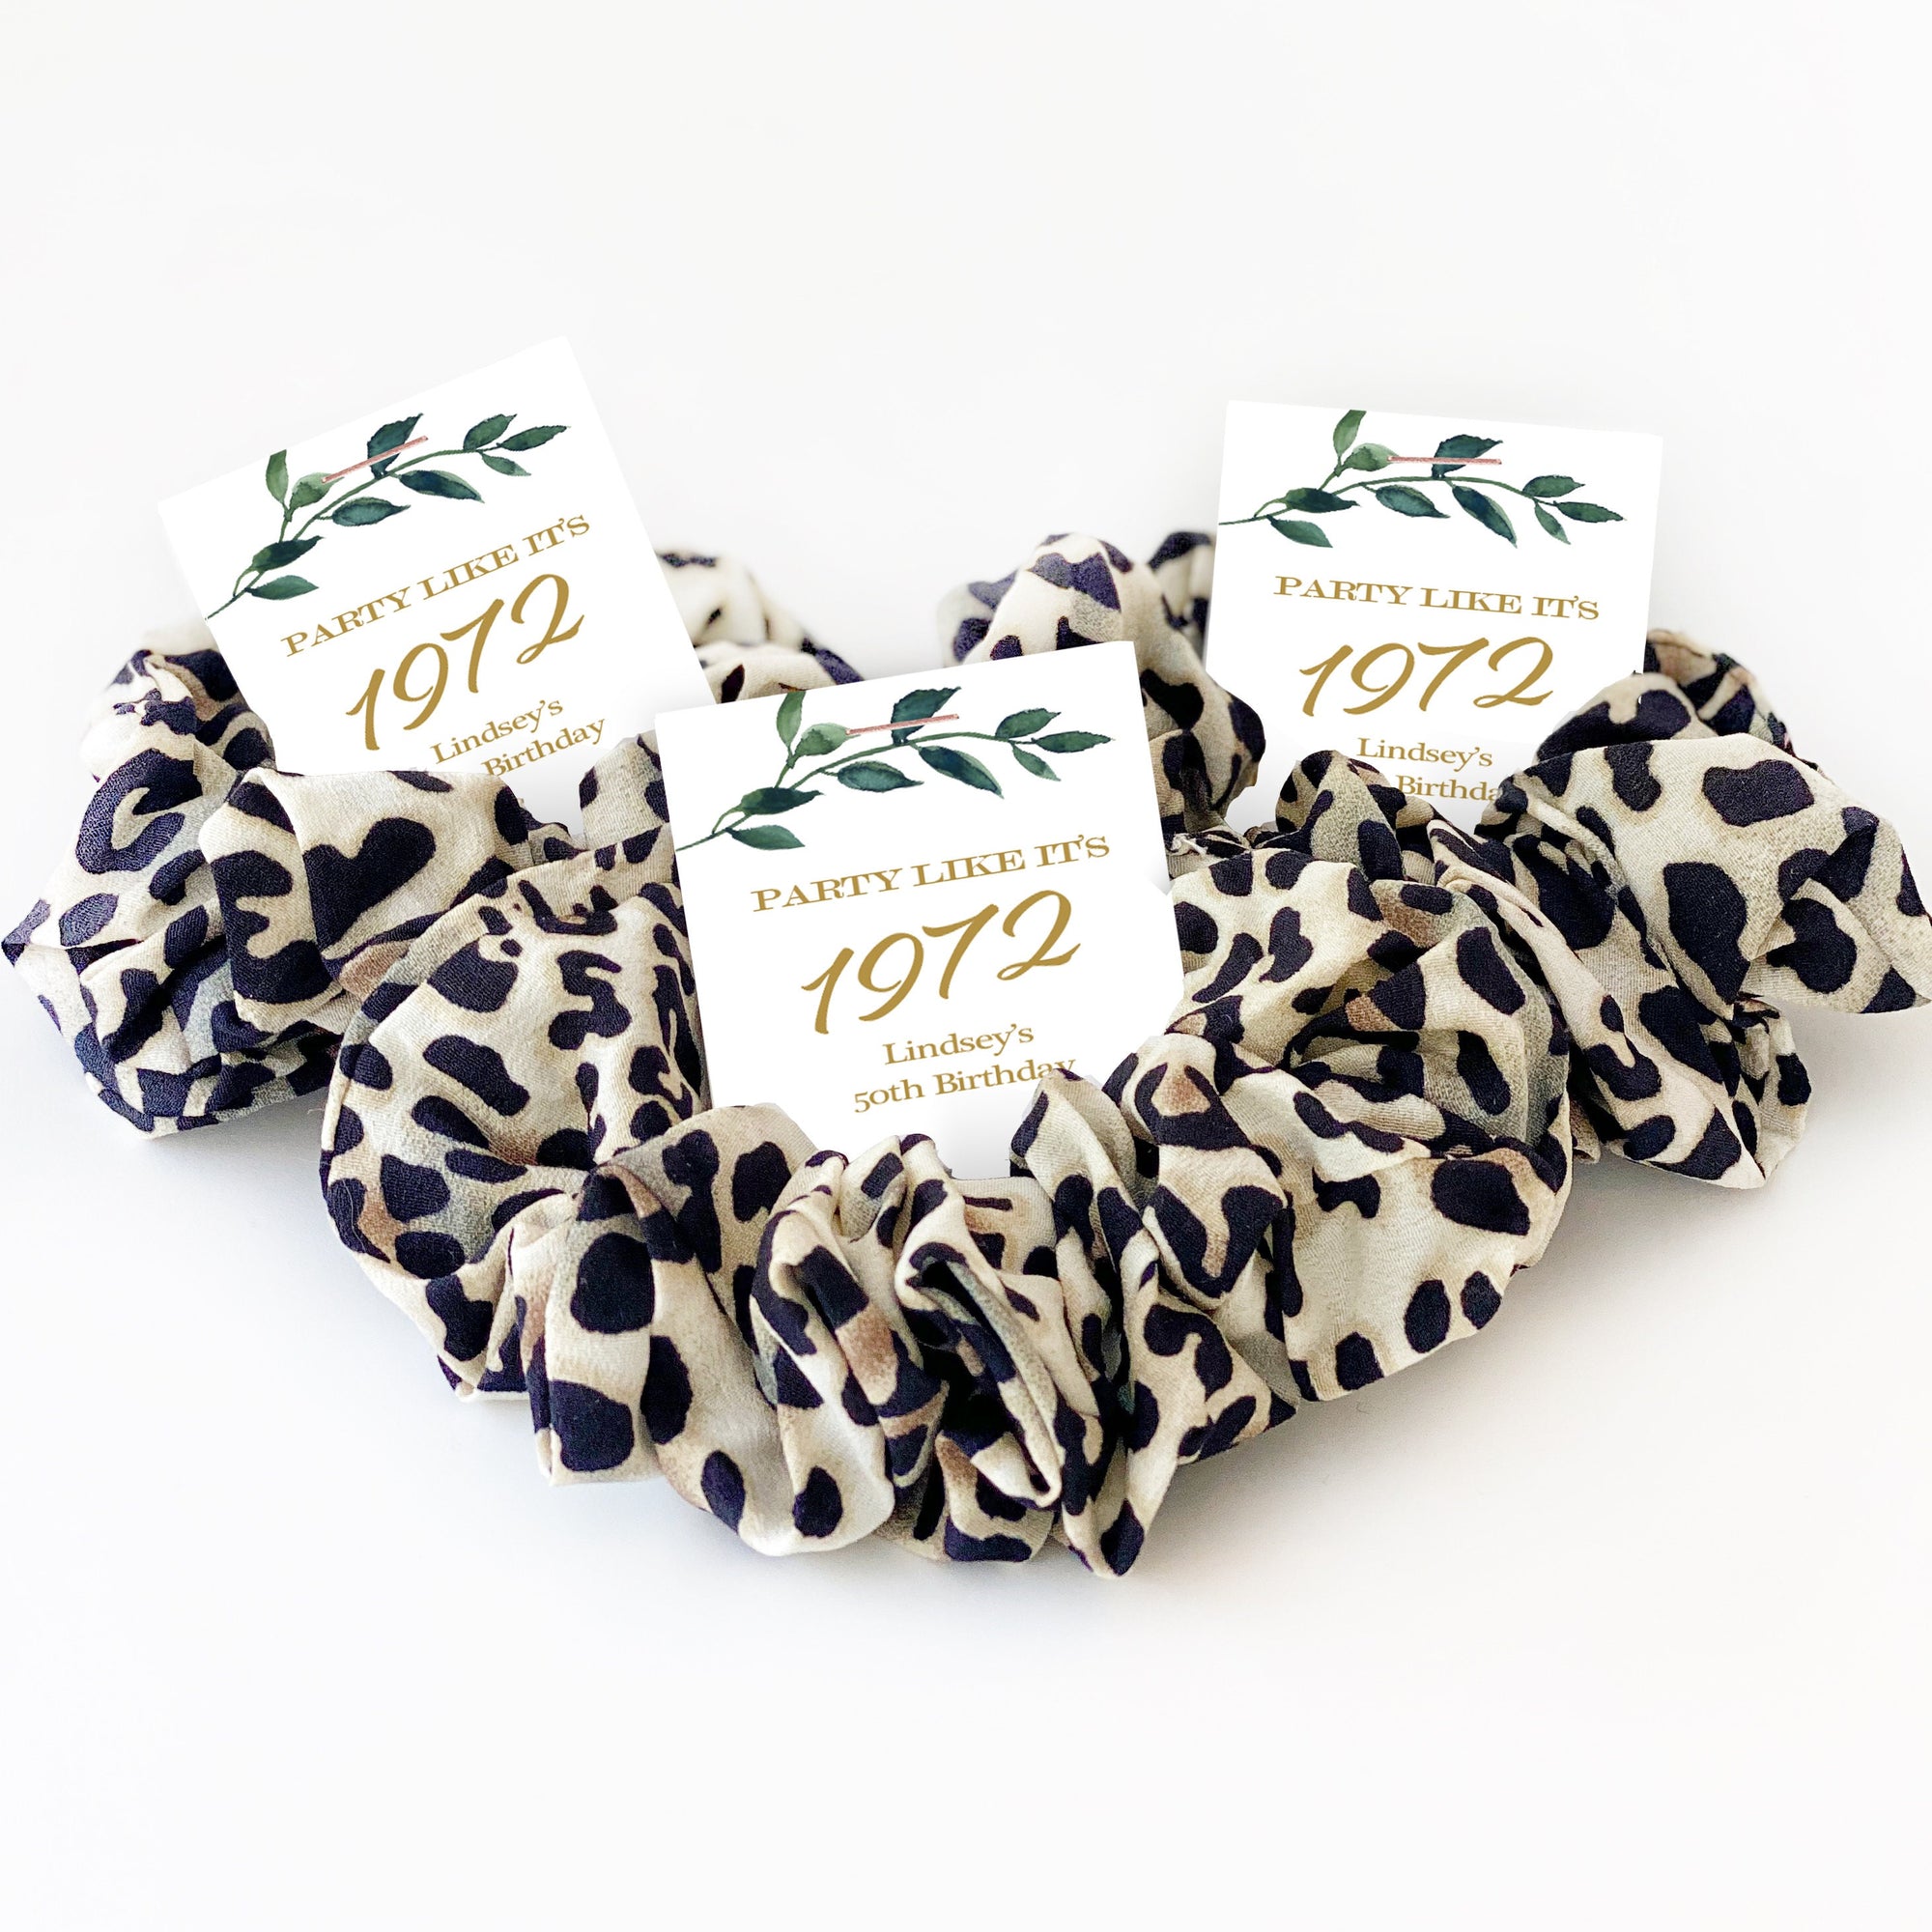 50th Birthday Party Favors, Leopard Print Hair Scrunchies, 50th Birthday Favors for Women, Birthday Supplies, 50 Years, Party Like Its 1972